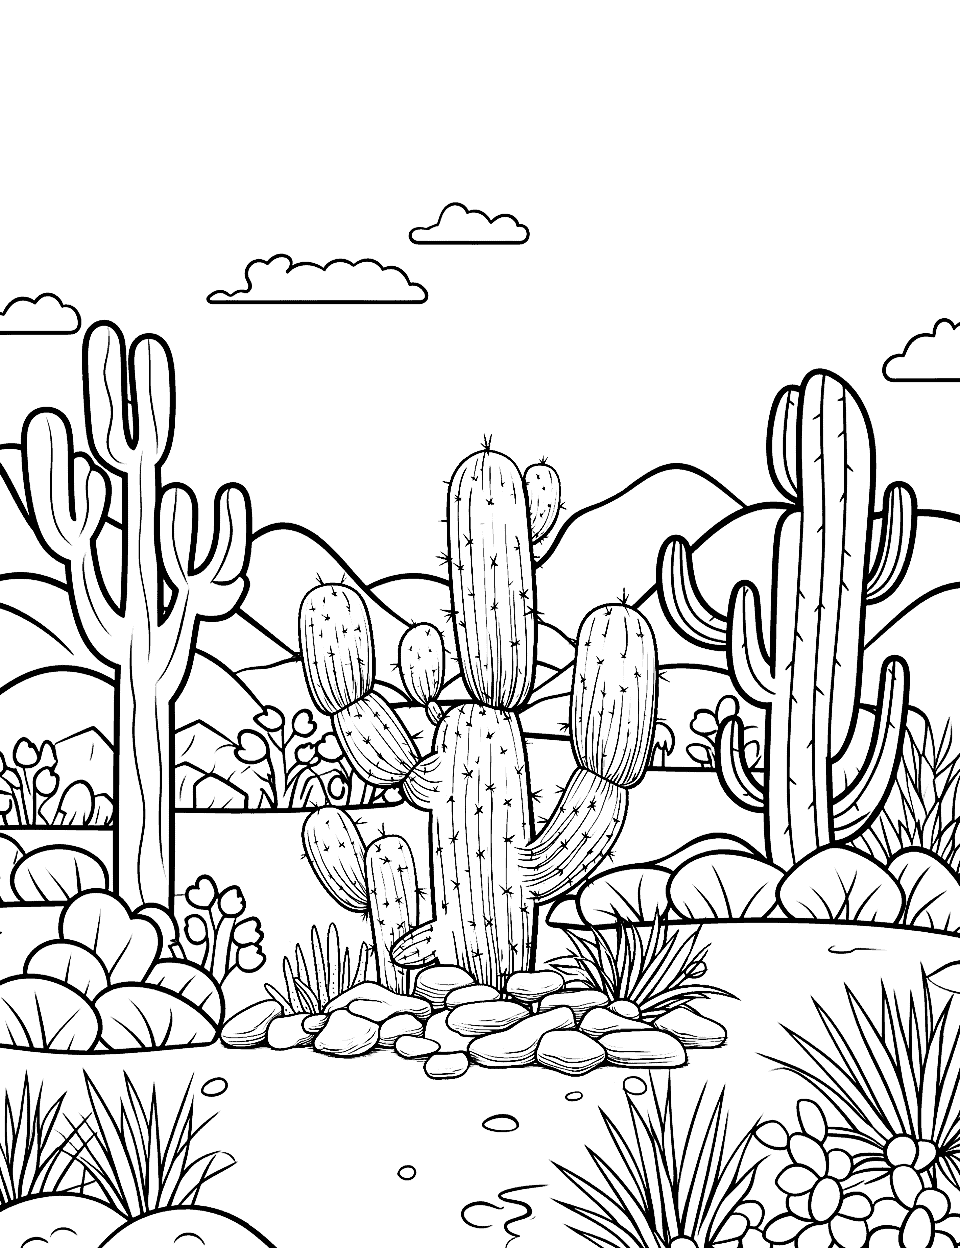 Cactus Garden Coloring Page - A scene showing a variety of cacti in a desert-like area.